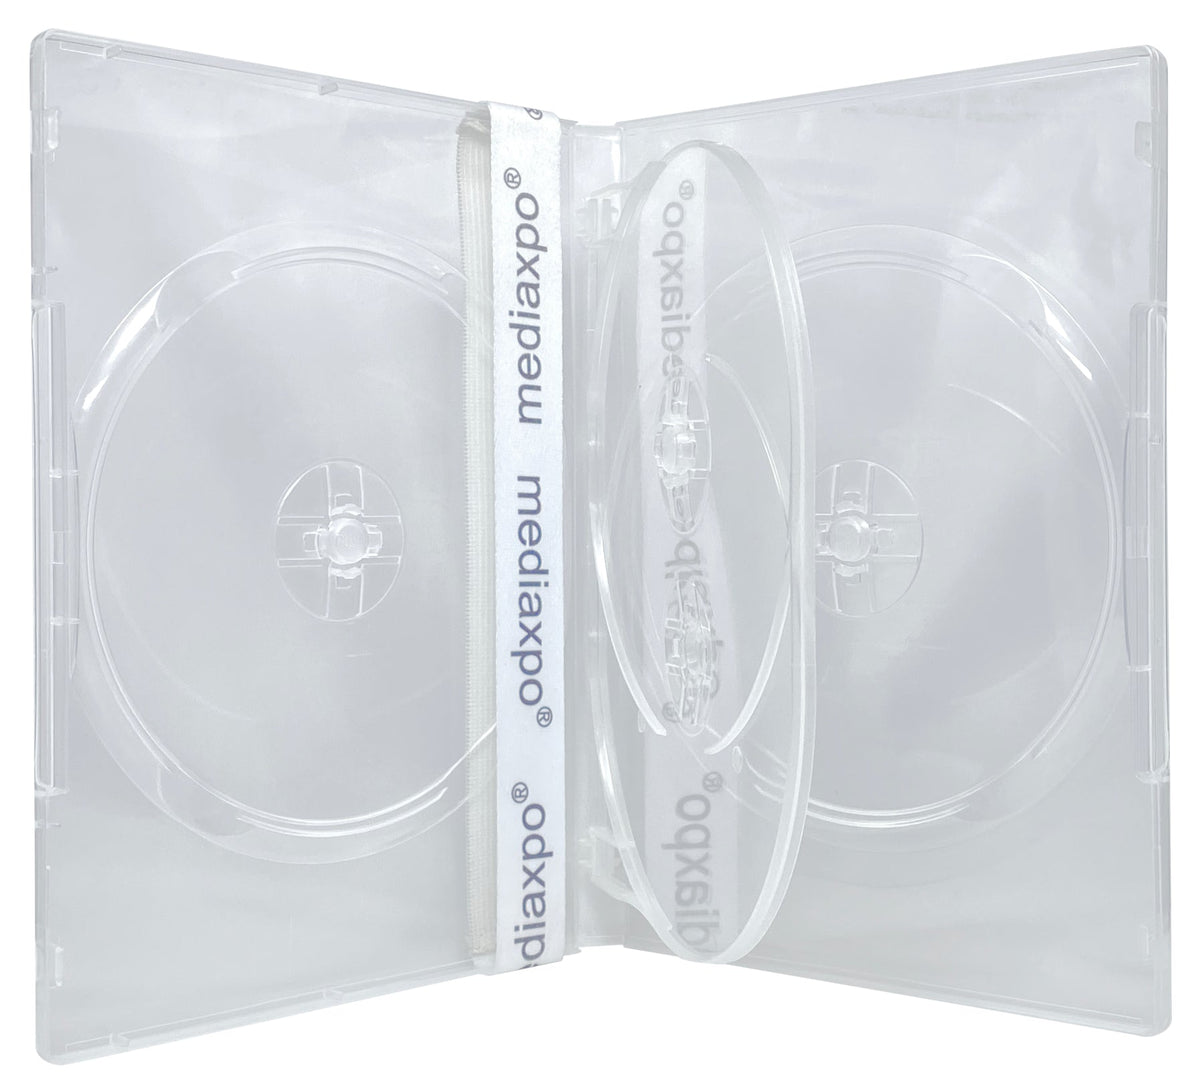 CheckOutStore Aluminum CD/DVD Hanging Sleeves Storage Box (Holds 300 Discs)